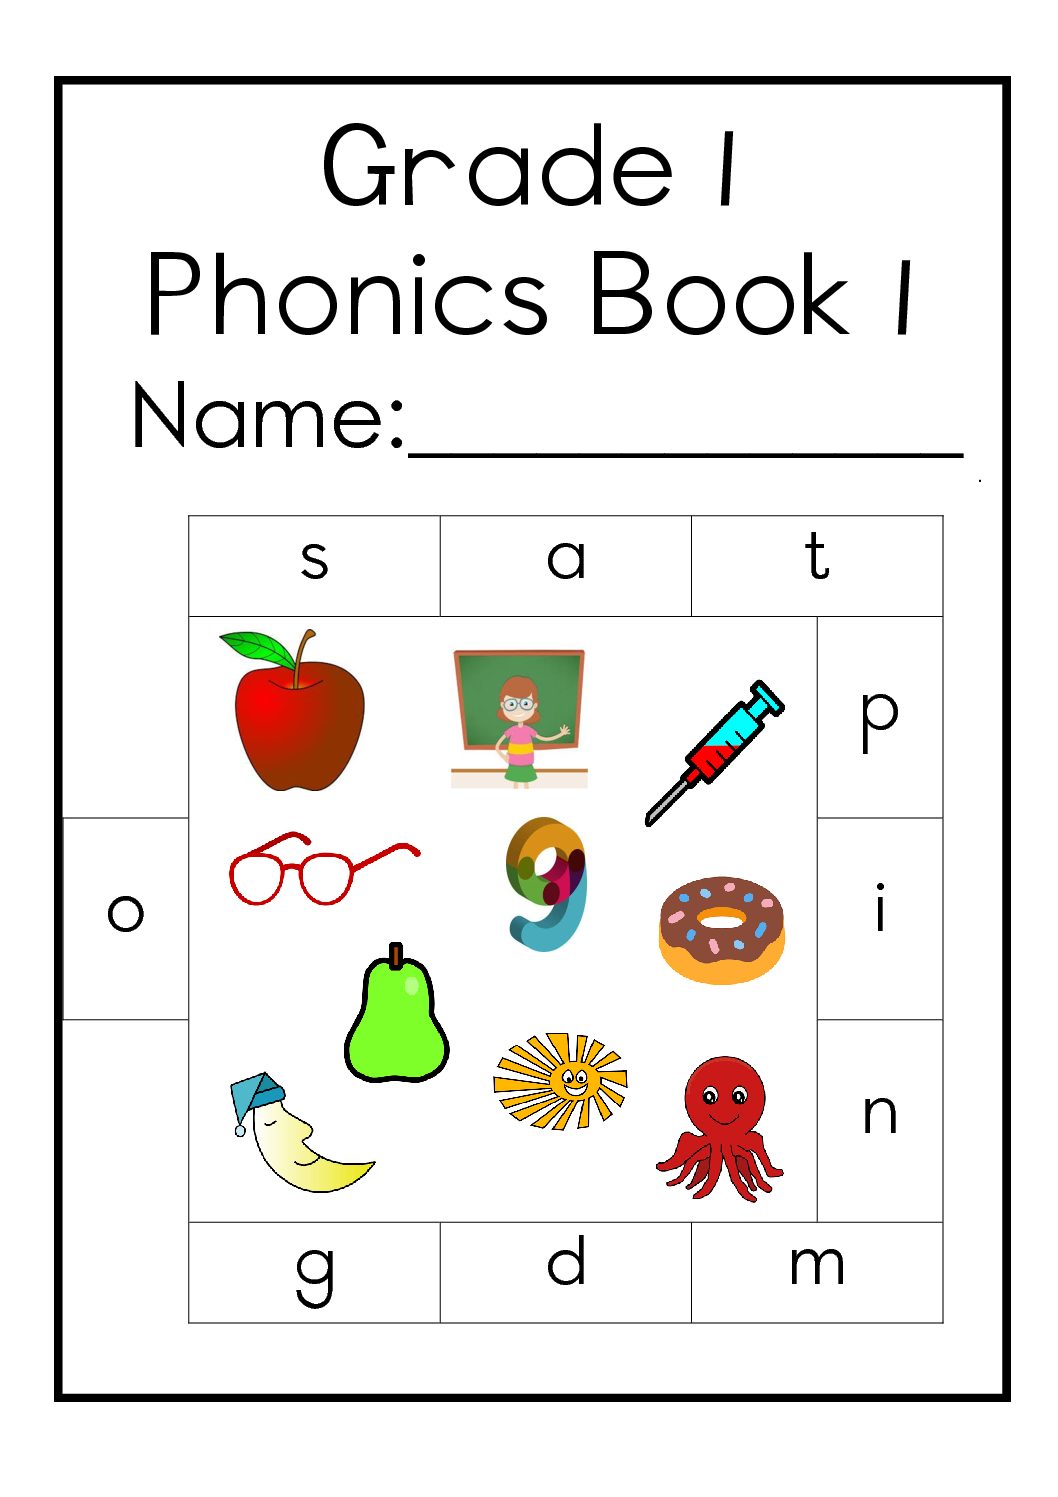 first-grade-phonics-level-1-phonics-rules-posters-by-mrs-wheeler